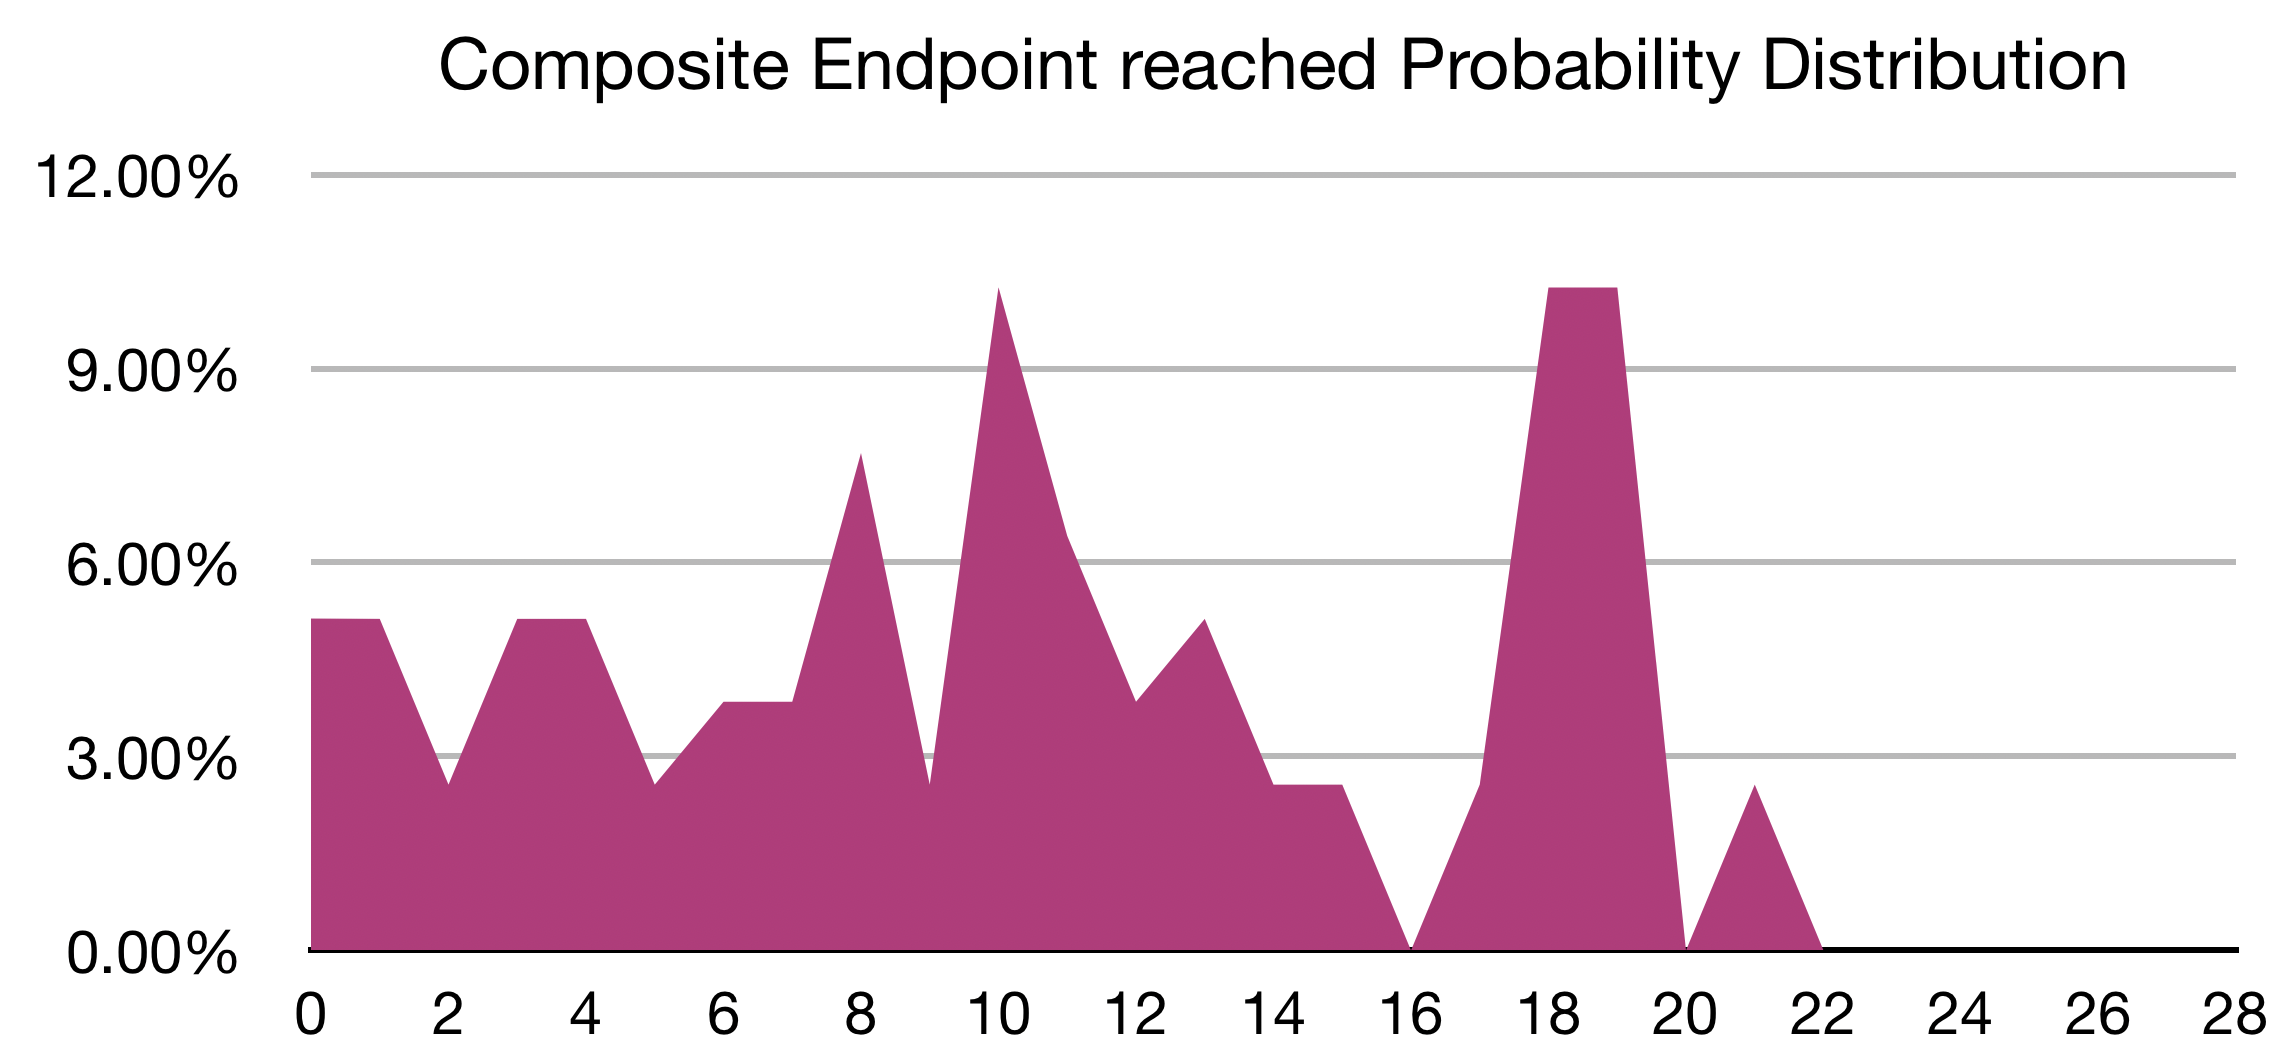 Composite Endpoint reached Probability Distribution